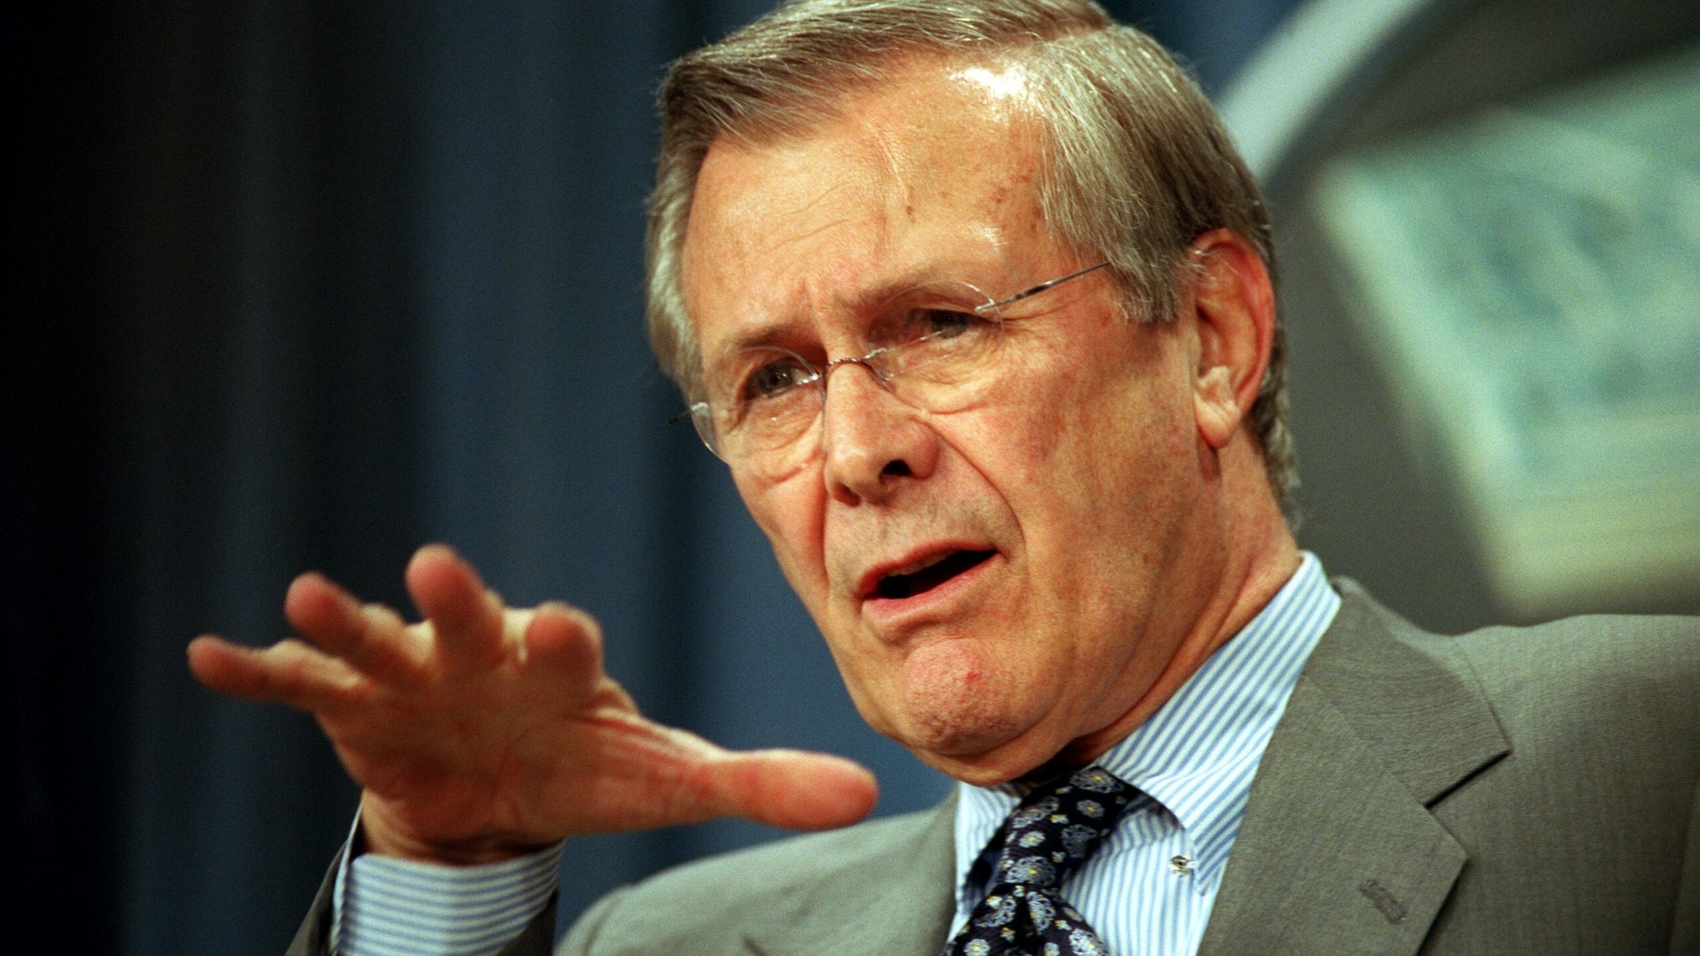 020221-D-9880W-080
	Secretary of Defense Donald H. Rumsfeld briefs reporters at the Pentagon on the latest developments in the war on terrorism on Feb. 21, 2002.   Rumsfeld and Chairman of the Joint Chiefs of Staff Gen. Richard B. Myers, U.S. Air Force, provided details of the Jan. 23, 2002, U.S. ground assault on two buildings in the Afghan village of Hazar Qadam.  DoD photo by R. D. Ward.  (Released)